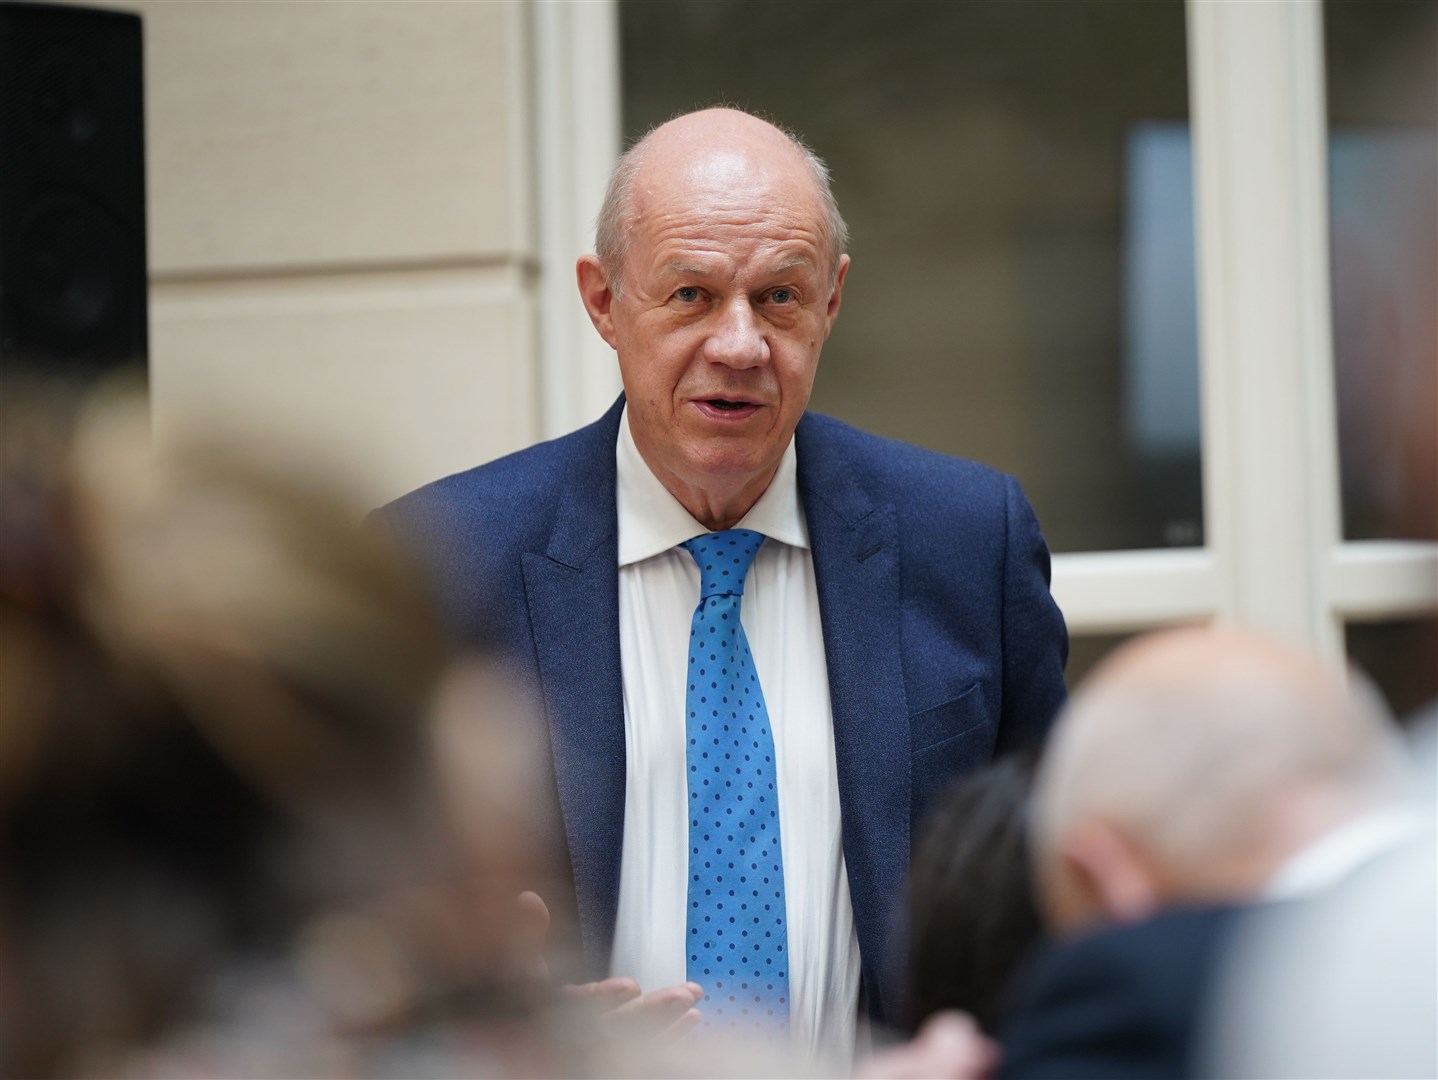 Damian Green’s One Nation Caucus has been more cautious in proposing tax cuts, preferring a rebalancing of the tax system (Yui Mok/PA)